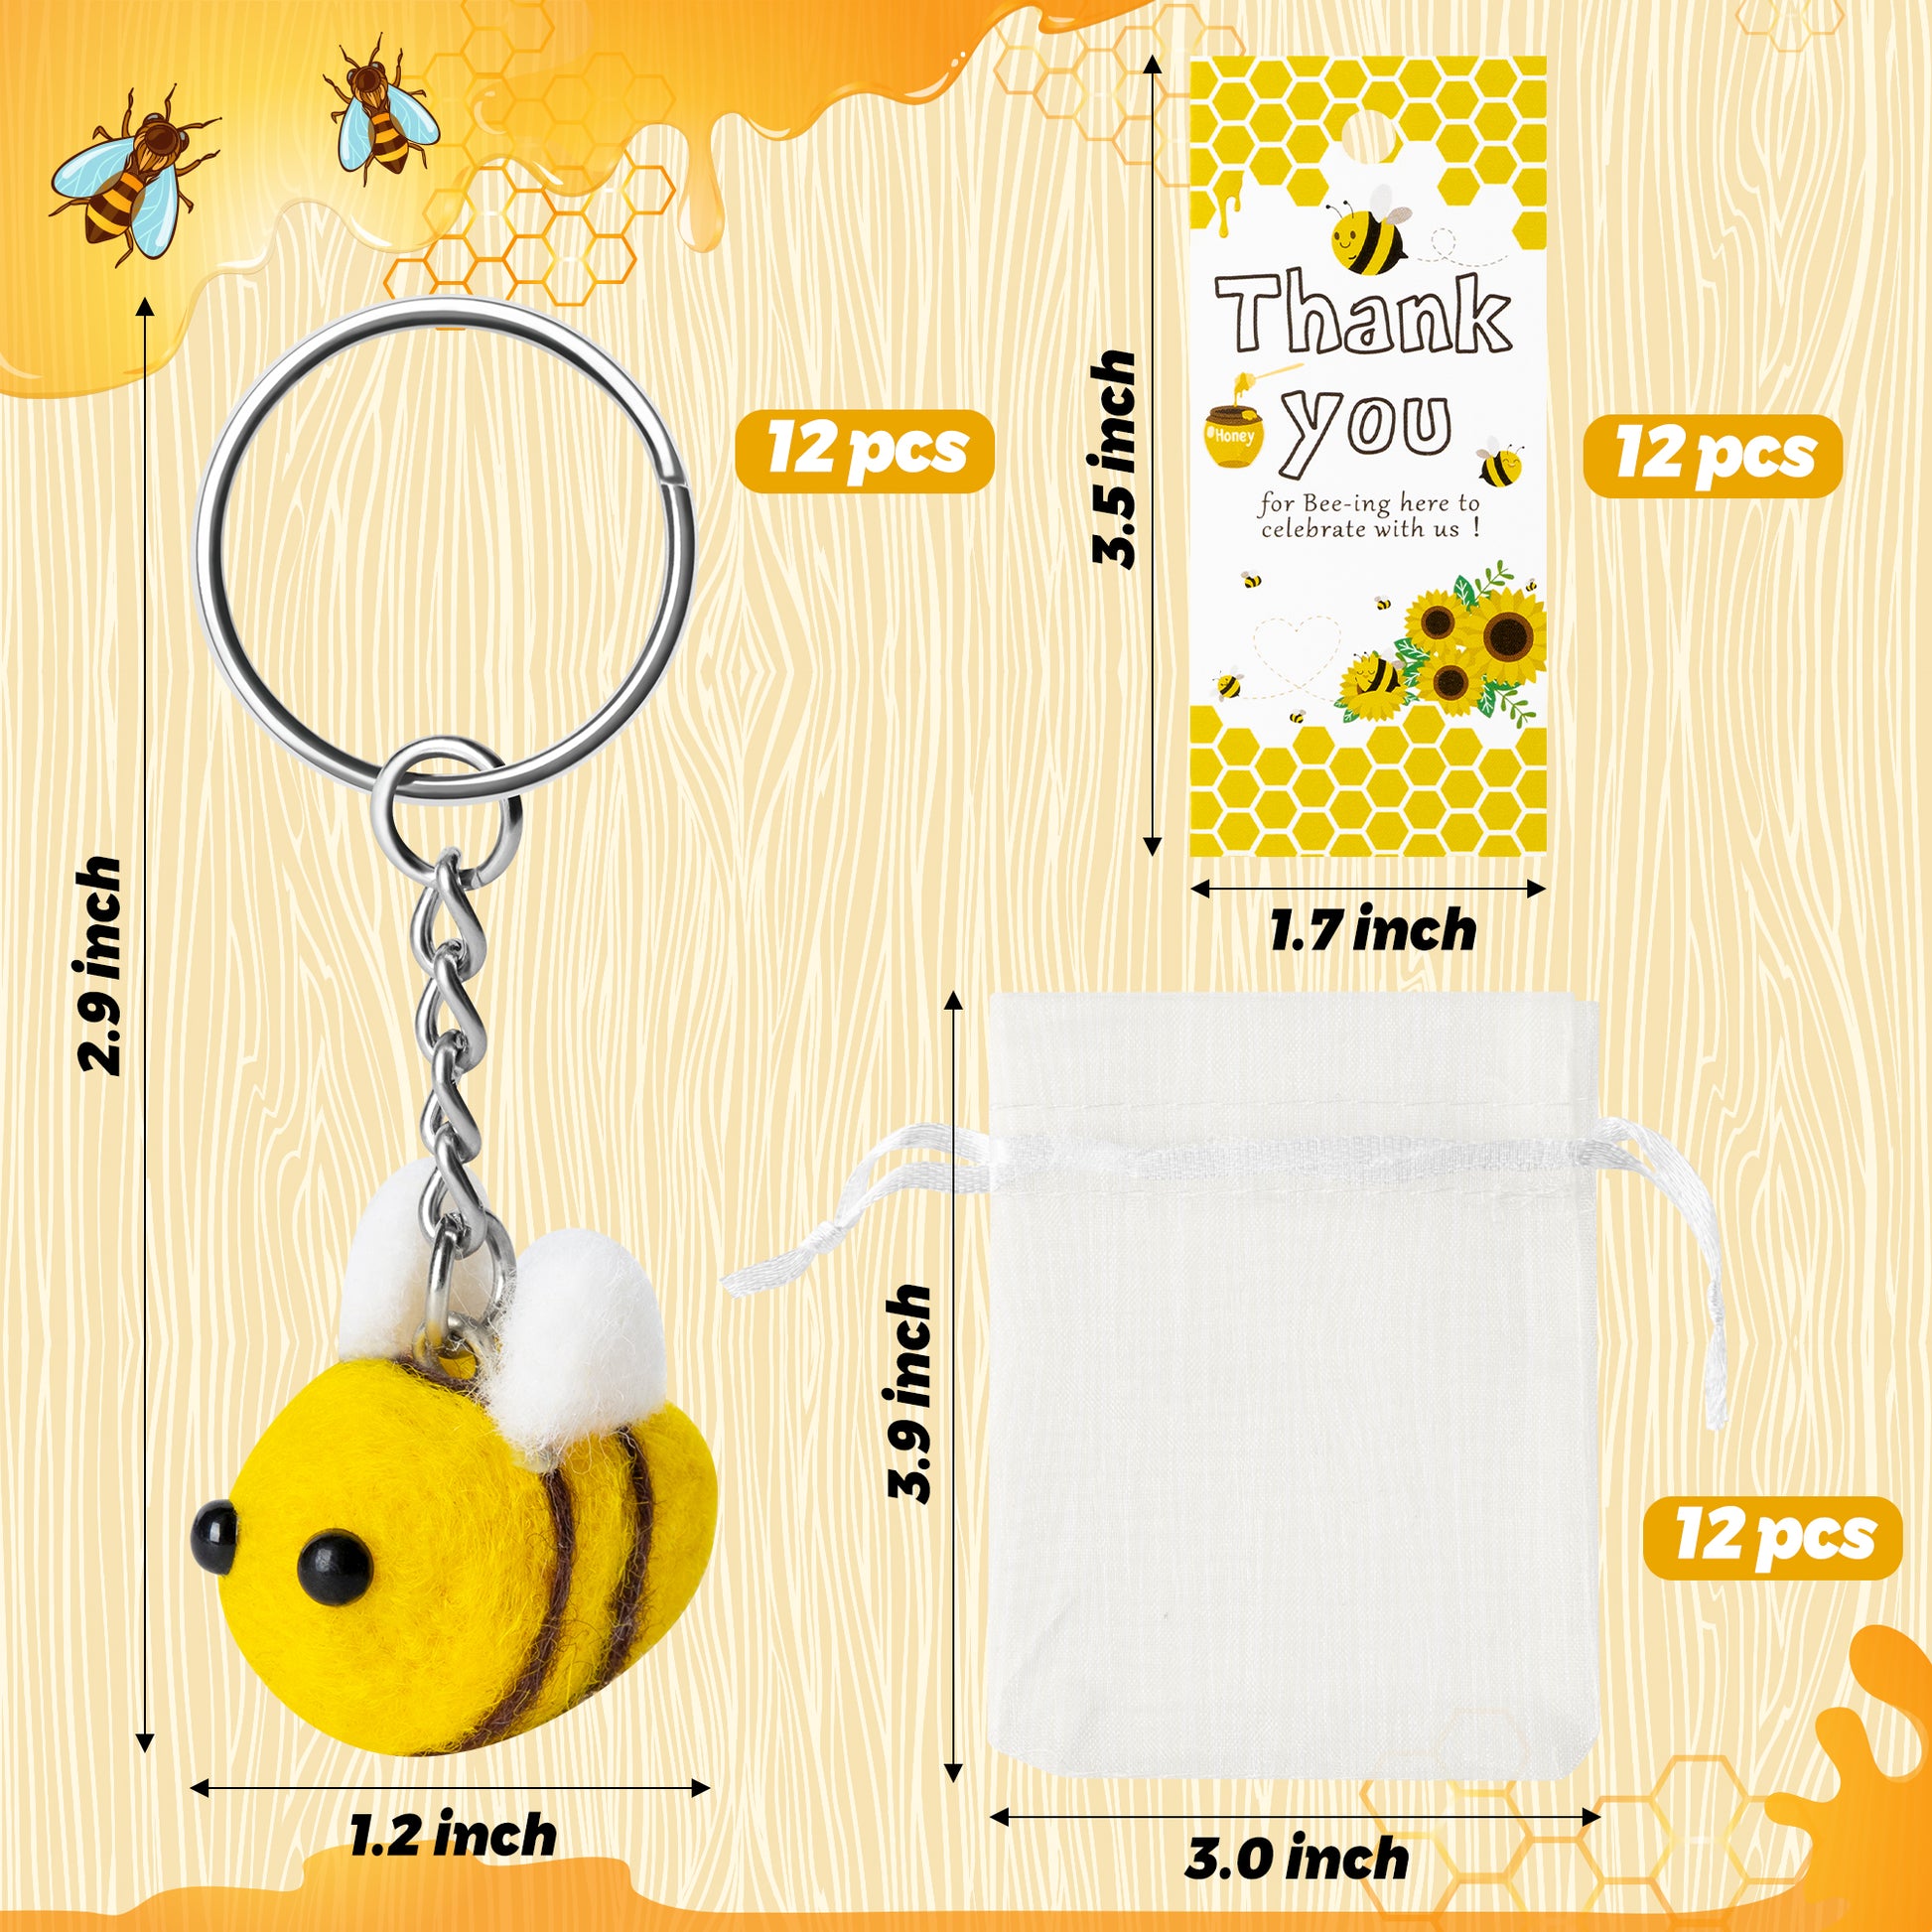 150 Pcs Bee Party Favors Include Bee Keychain Organza Bee Bag Bee